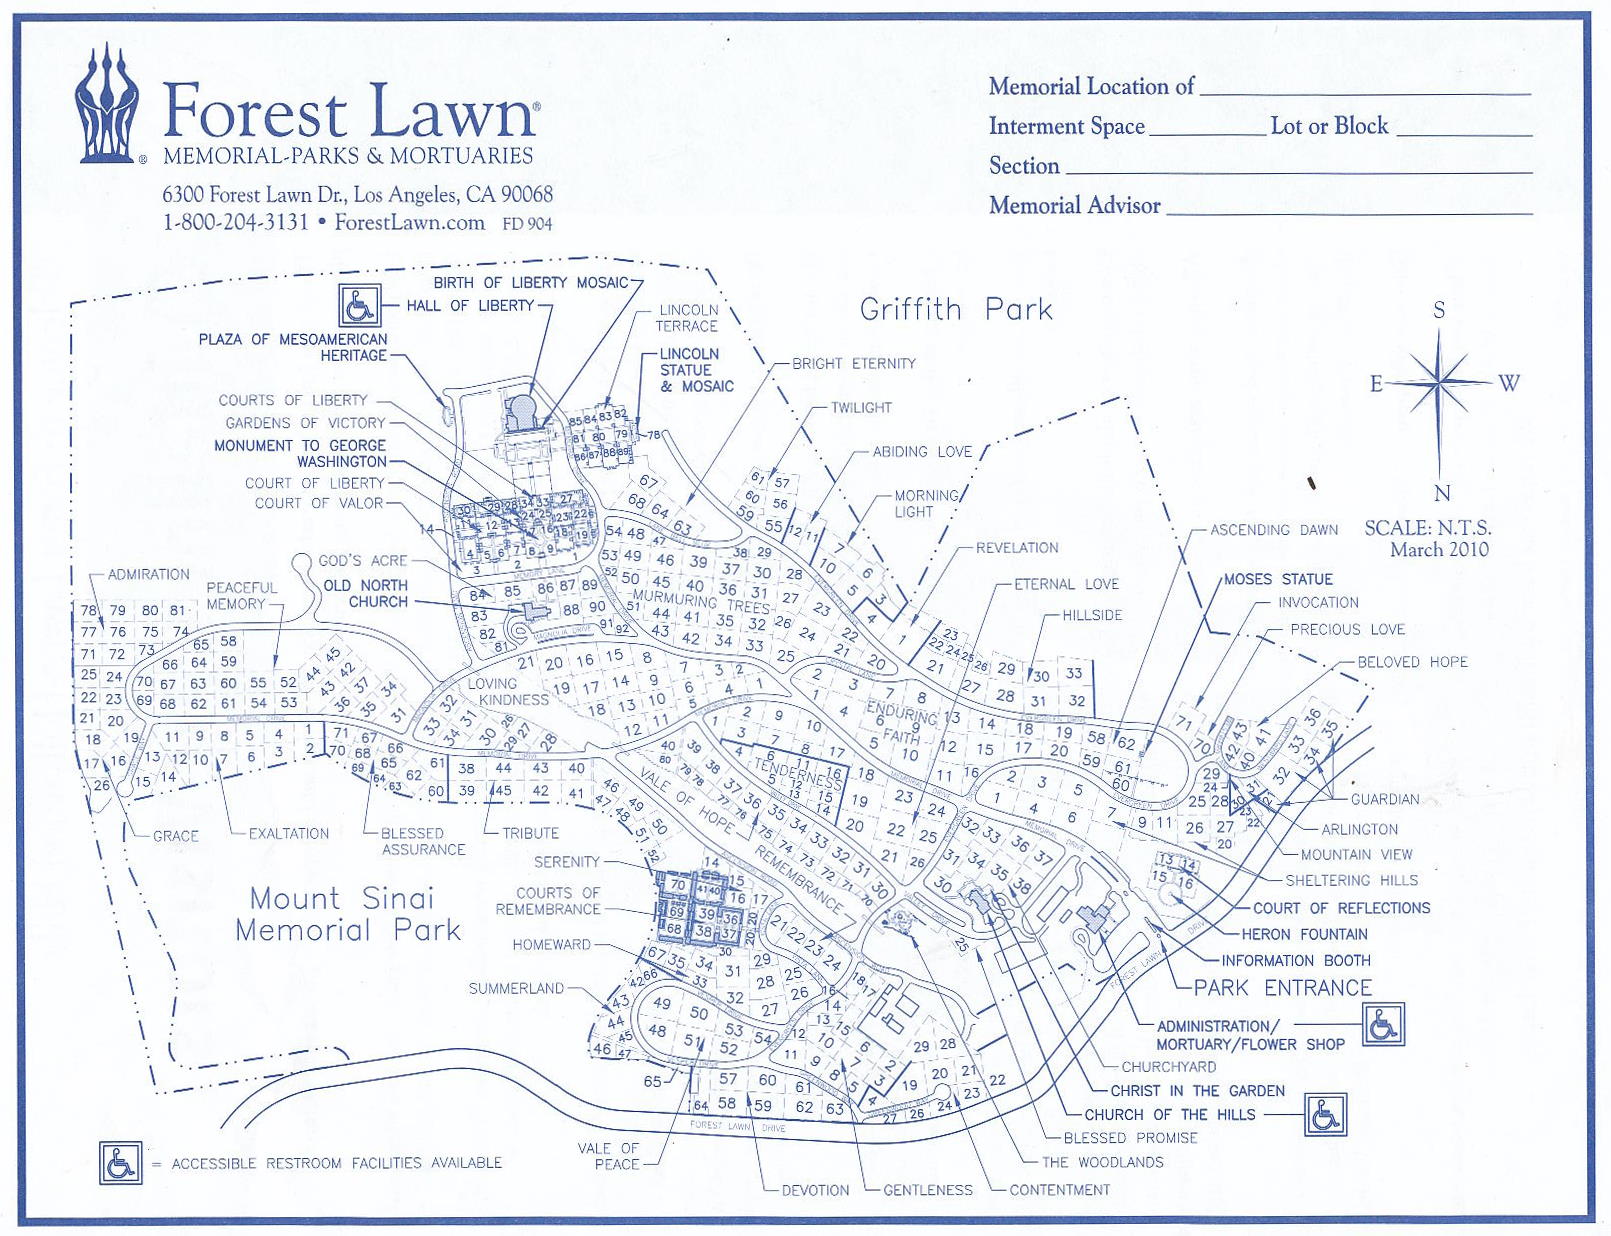 Cemetery map of Forest Lawn Memorial Park in Hollywood Hills, Los Angeles, California